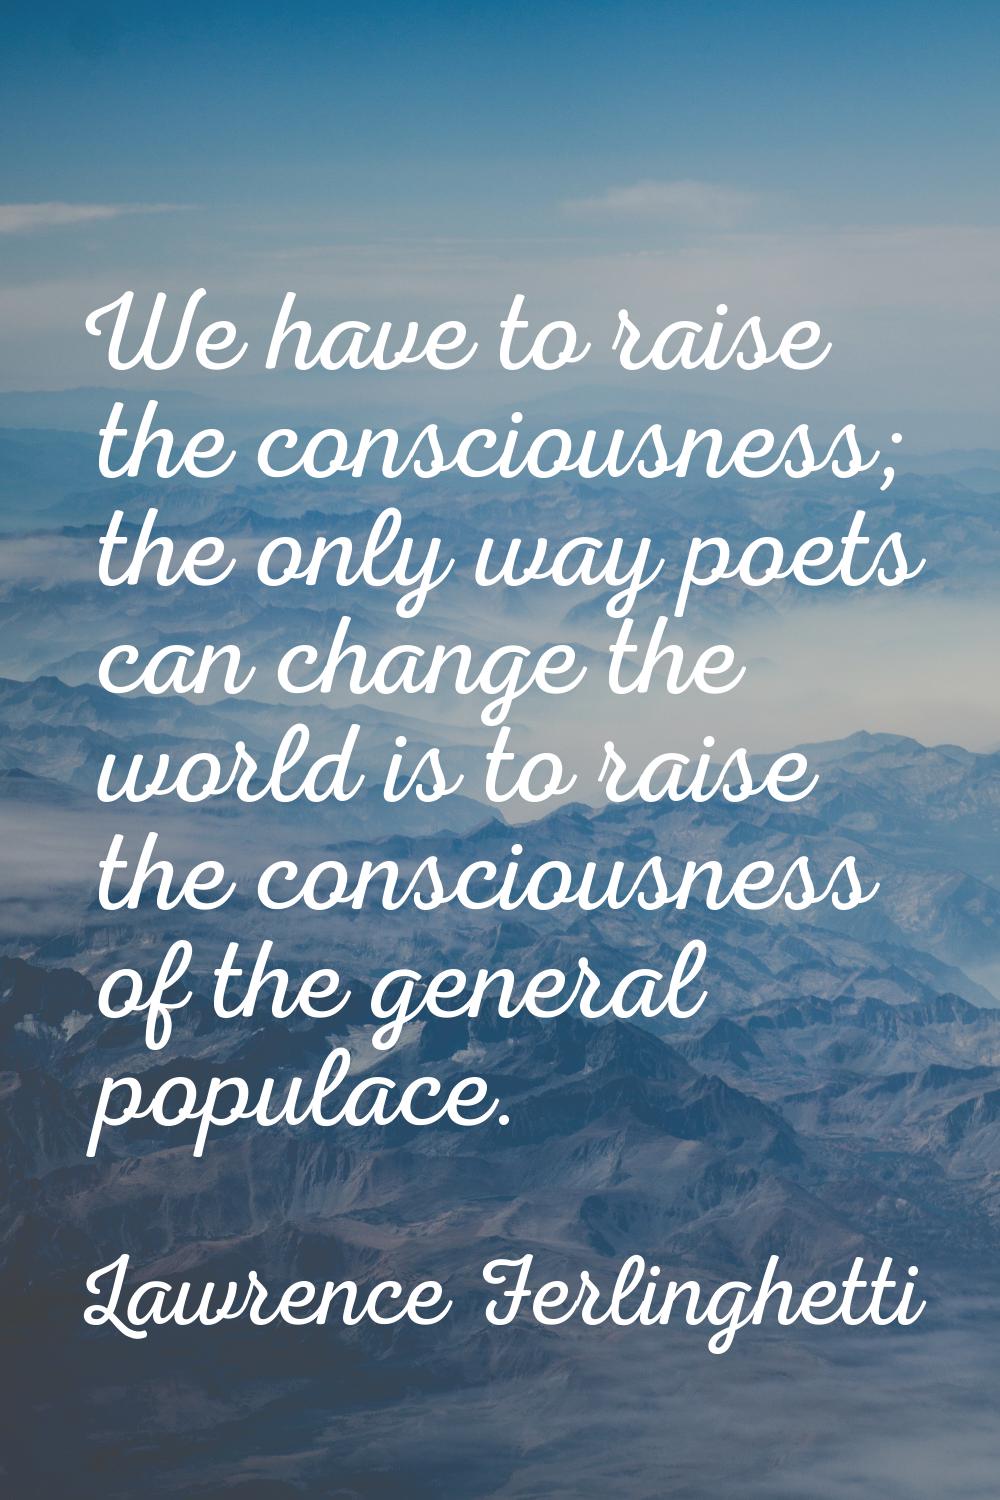 We have to raise the consciousness; the only way poets can change the world is to raise the conscio